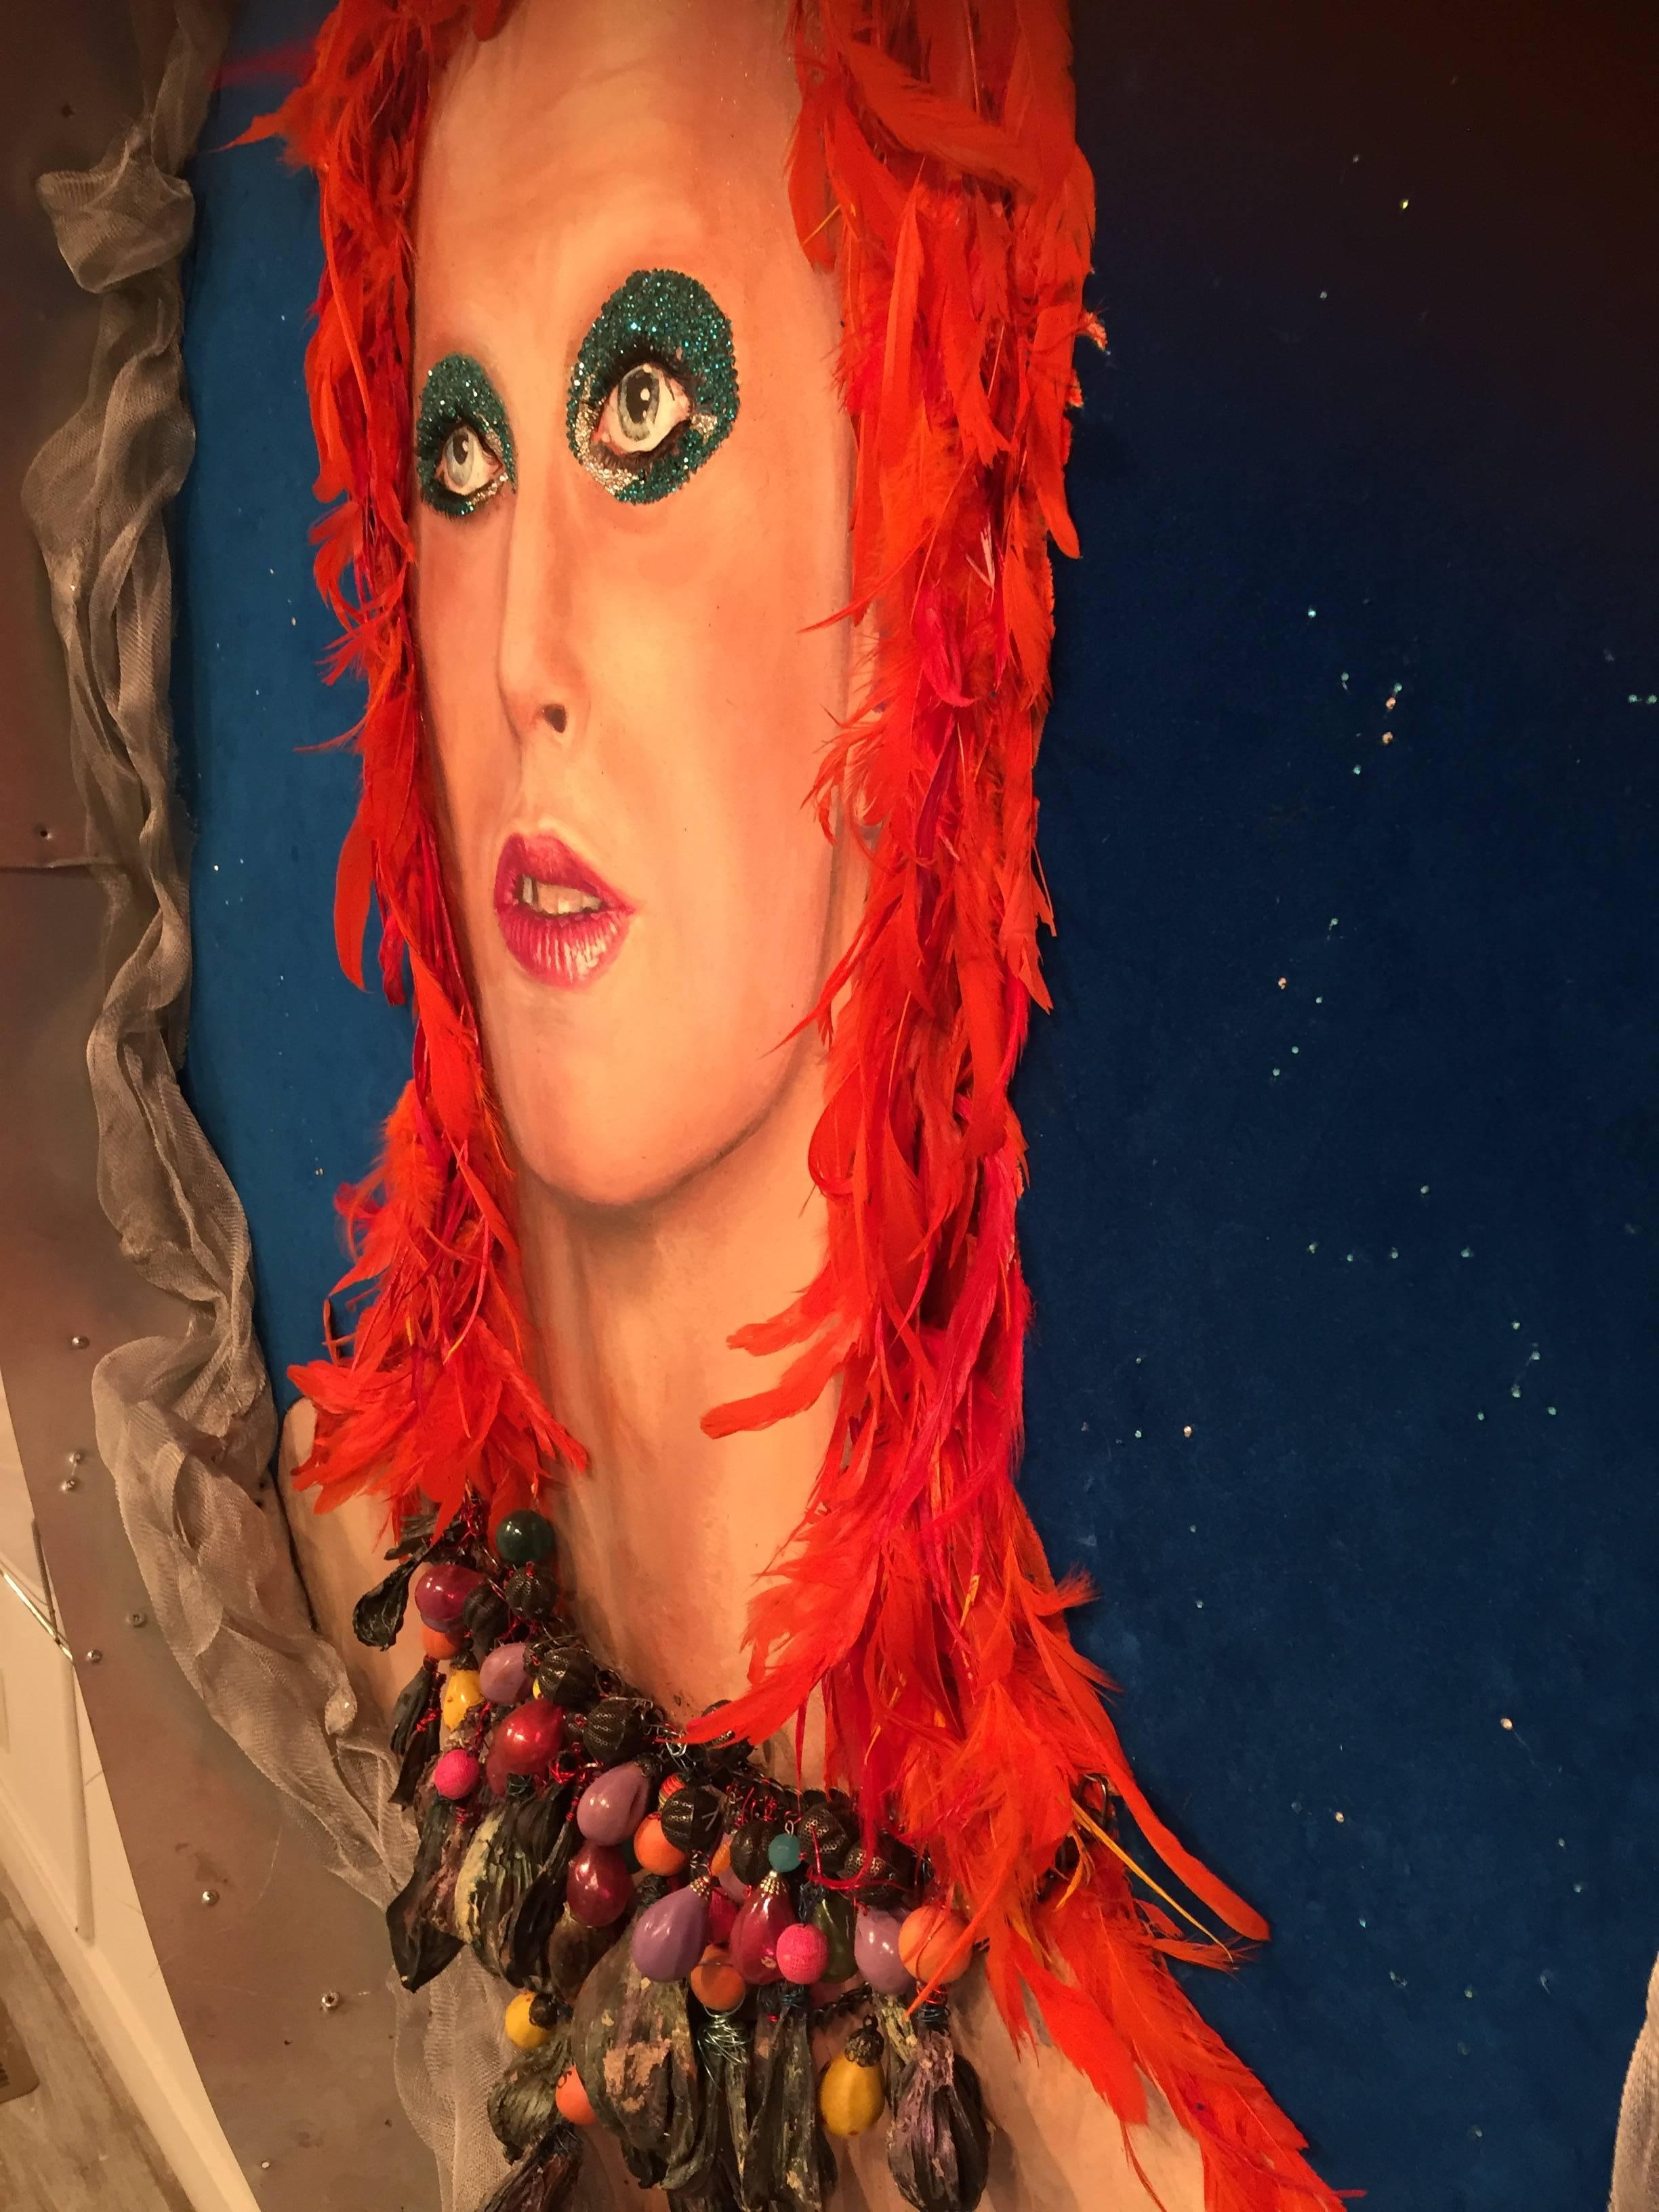 Bowie in Space - Mixed Media - 3d Portrait - one of a kind piece -  - Contemporary Mixed Media Art by StrosbergMandel